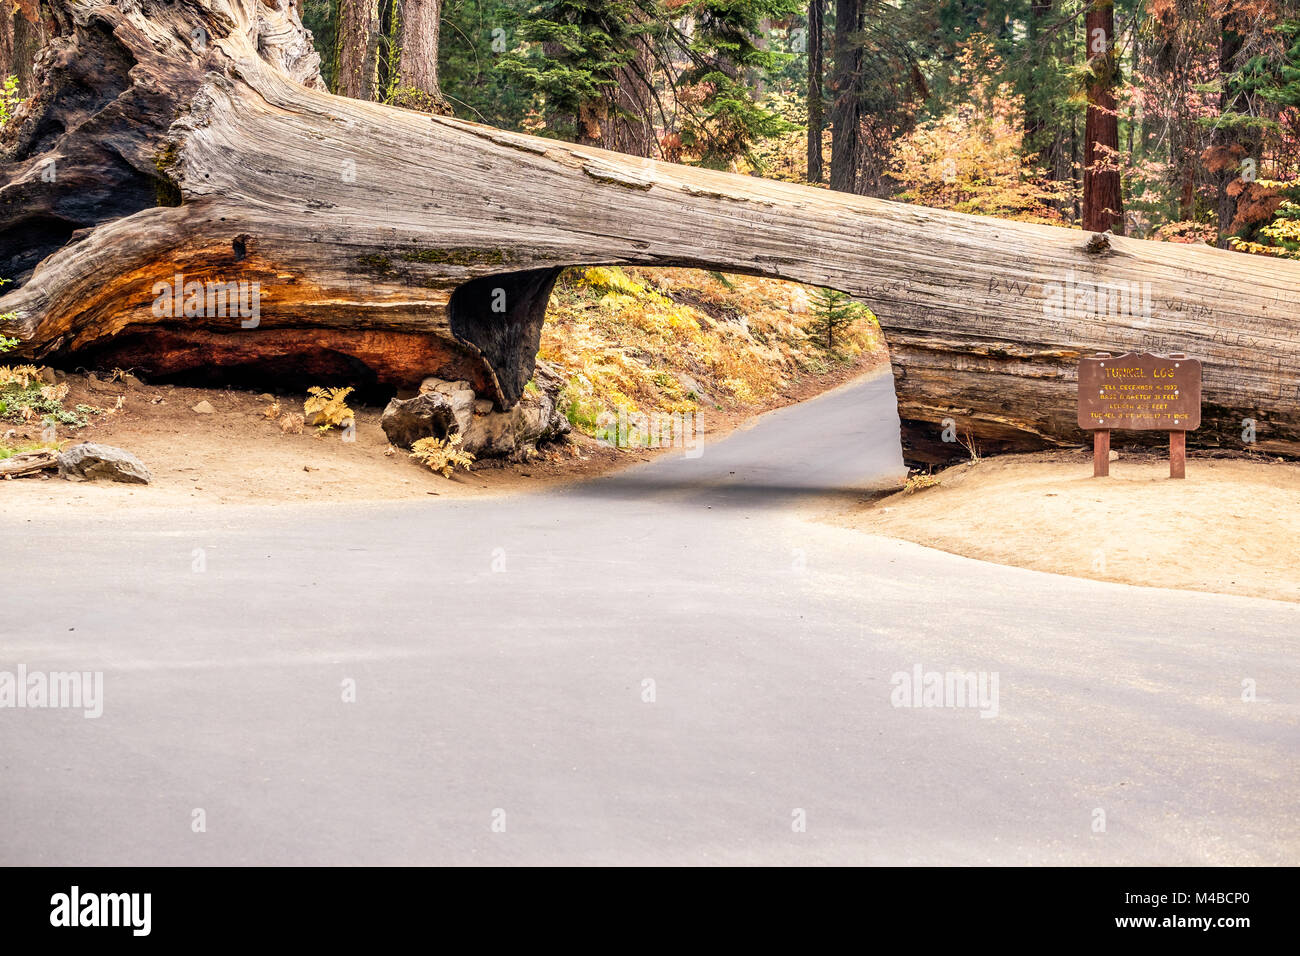 Tunnel Log in Sequoia National Park Stock Photo